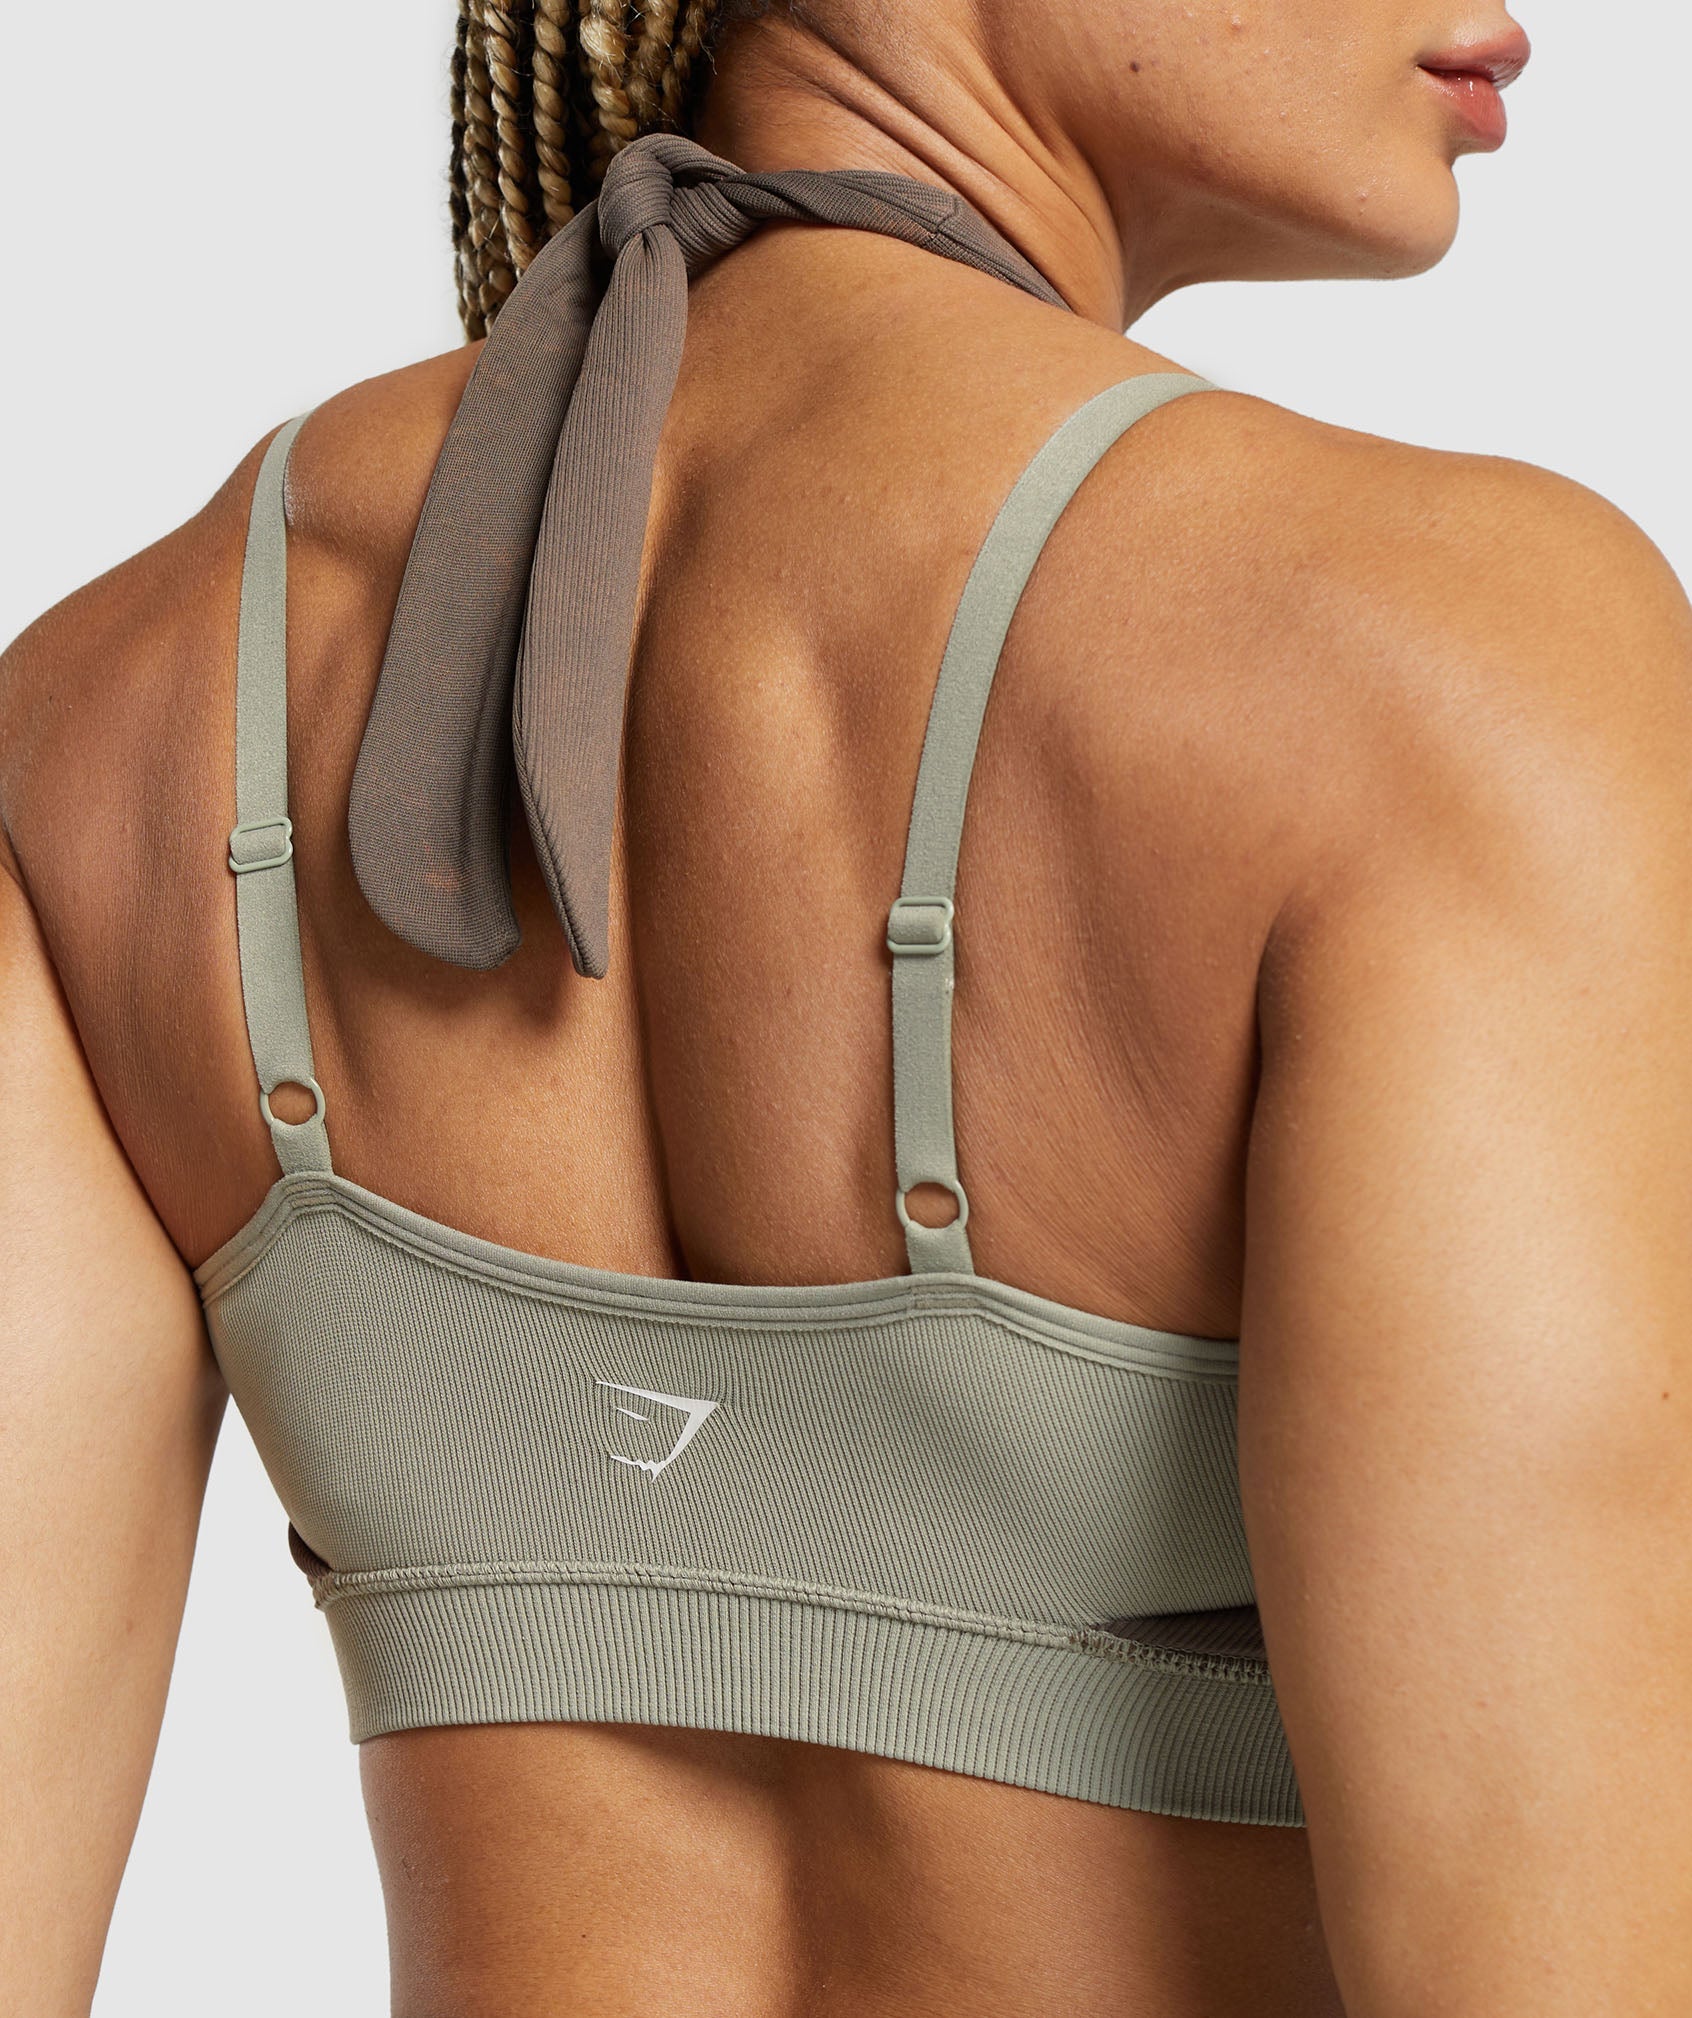 Gains Seamless Bralette in Chalk Green/Camo Brown - view 6